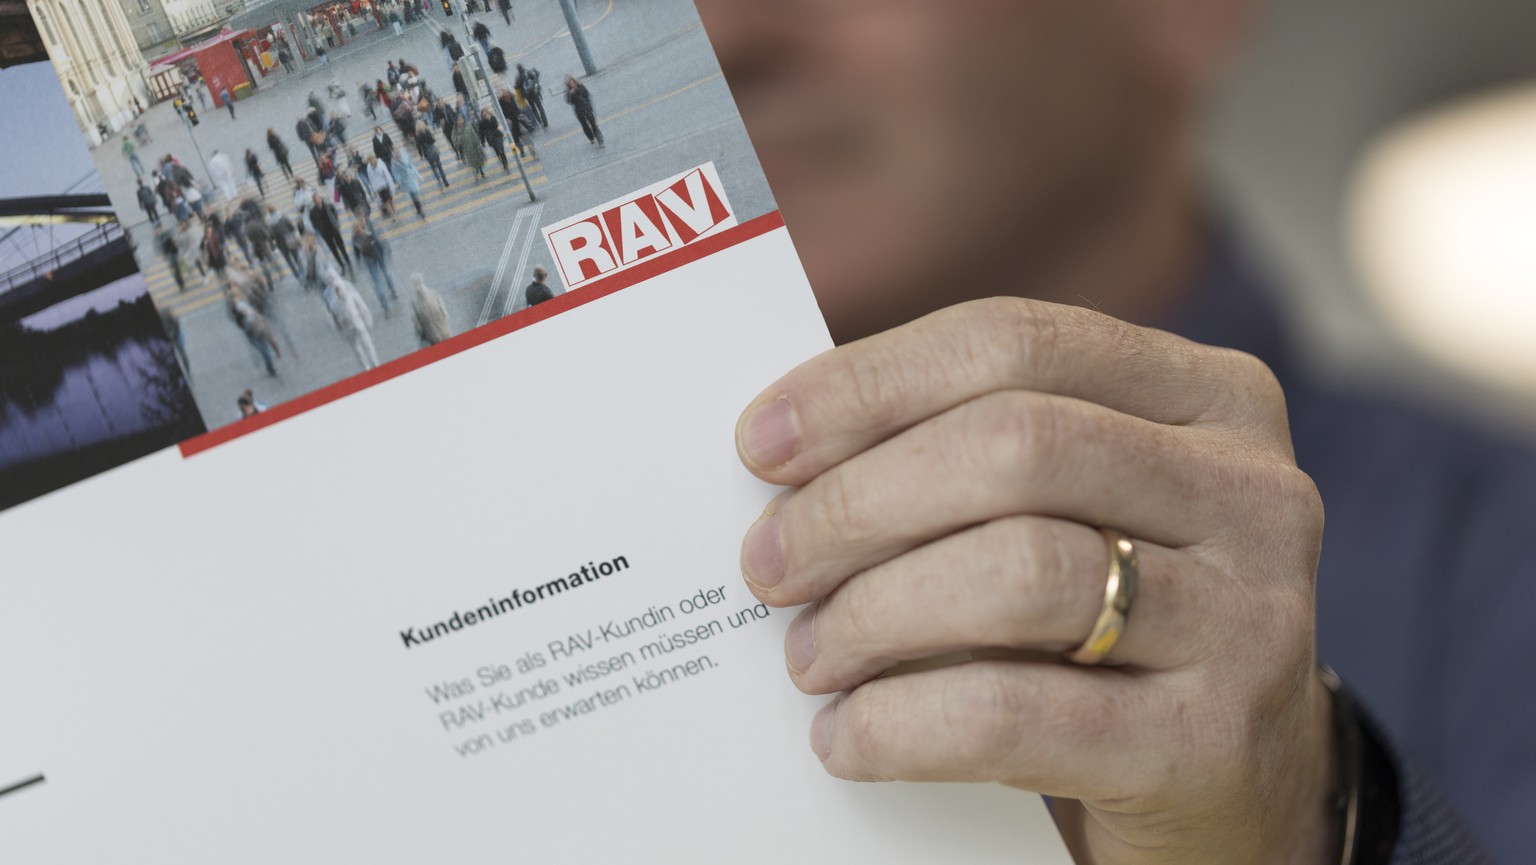 ARCHIVBILD ZUM RUECKGANG DER ARBEITLOSIGKEIT IM MAERZ 2018, AM MONTAG 9. APRIL 2018 - [Symbolic Image, Staged Picture] An unemployed person looks at information documents, pictured in a waiting room o ...